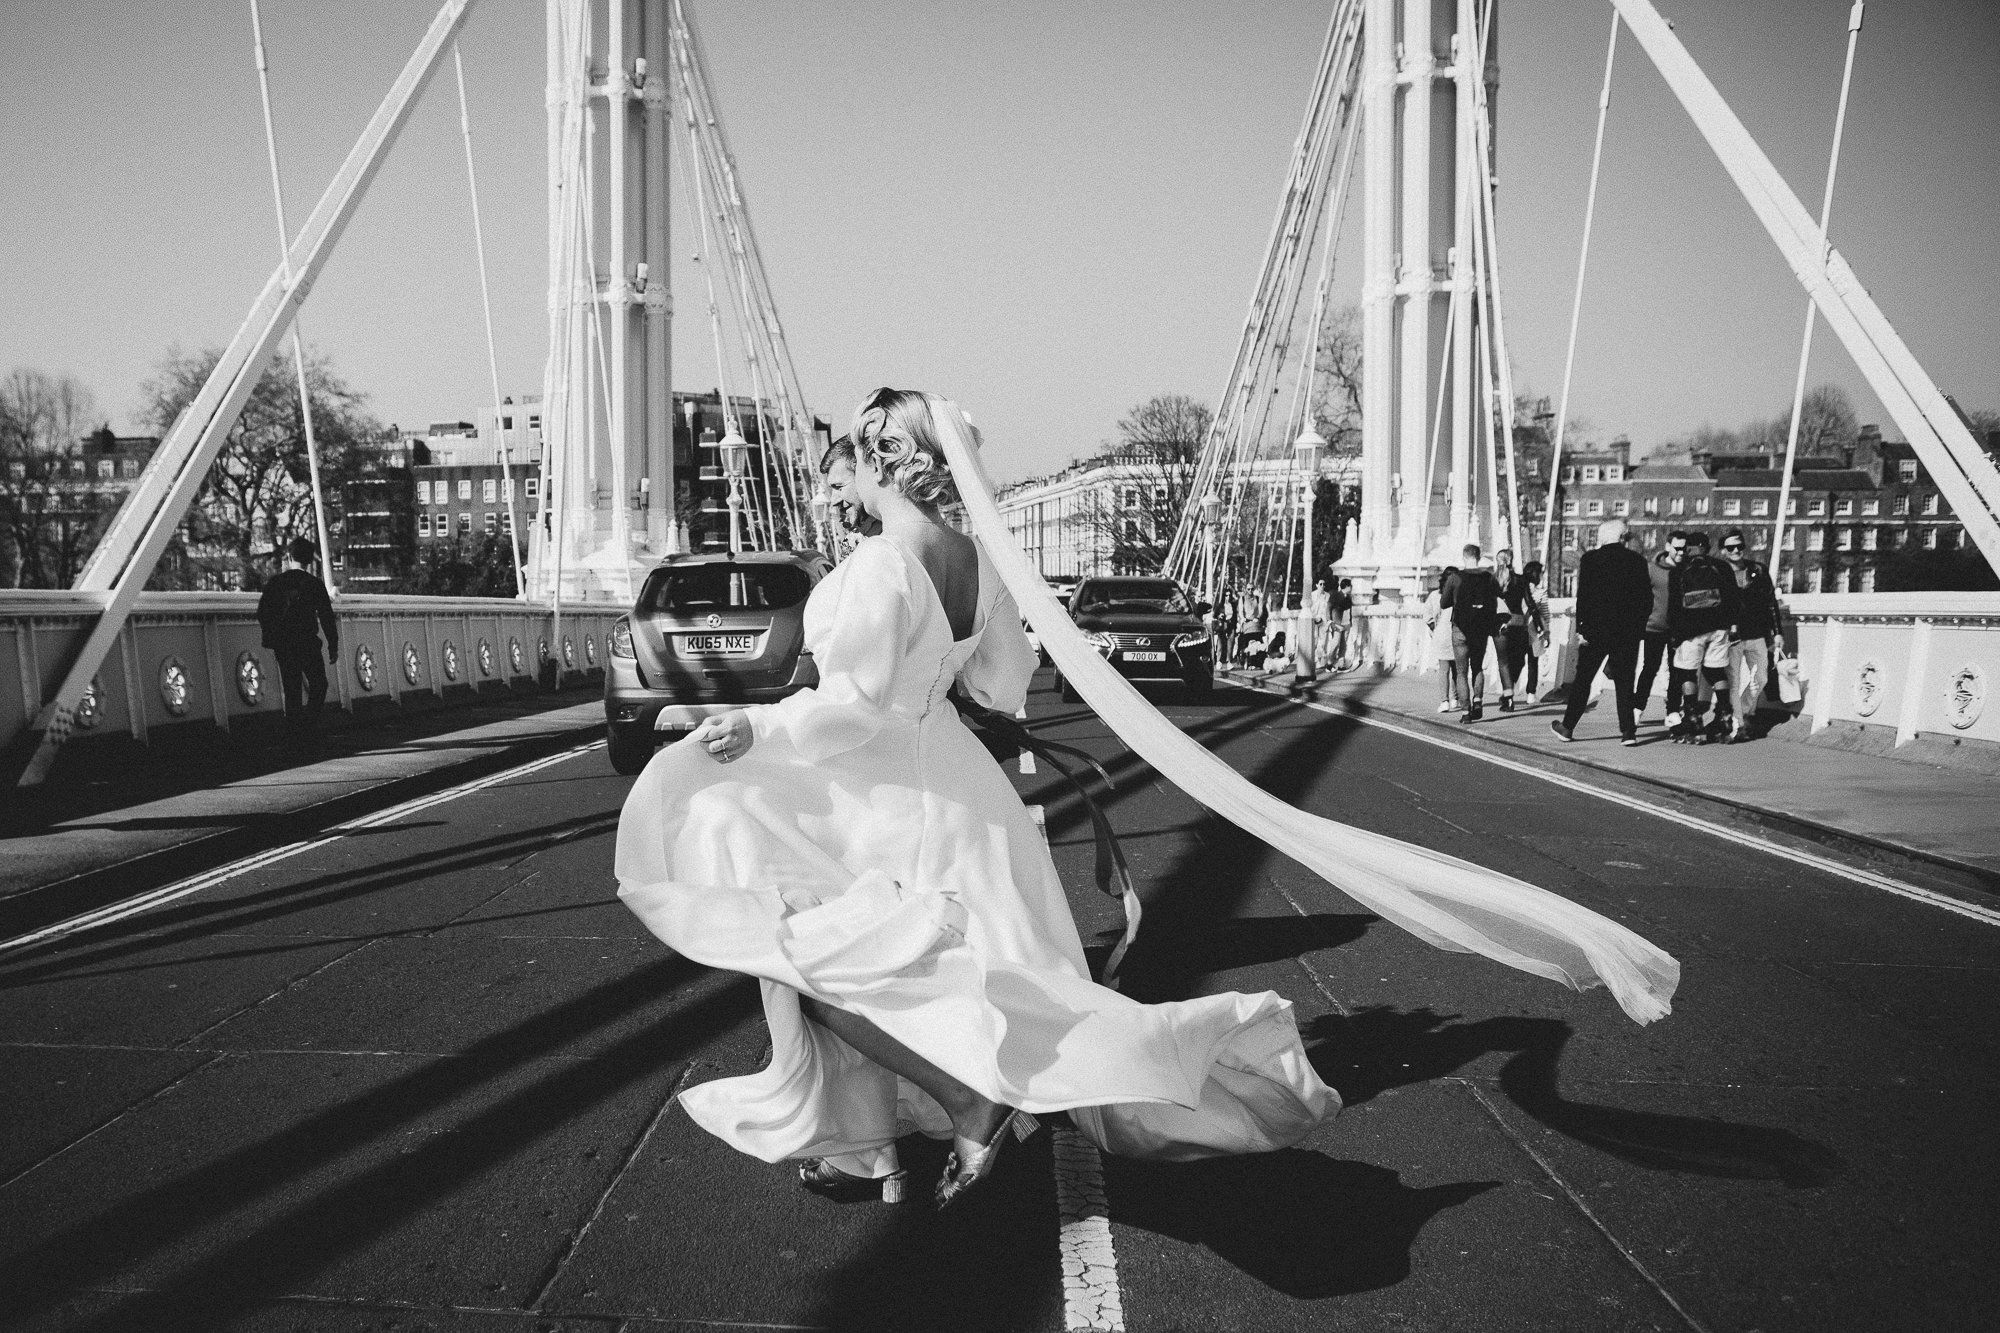  A cinematic style black and white image of a natural moment caught by the wedding photographer as the bride and groom cross the road going over a suspension bridge.  